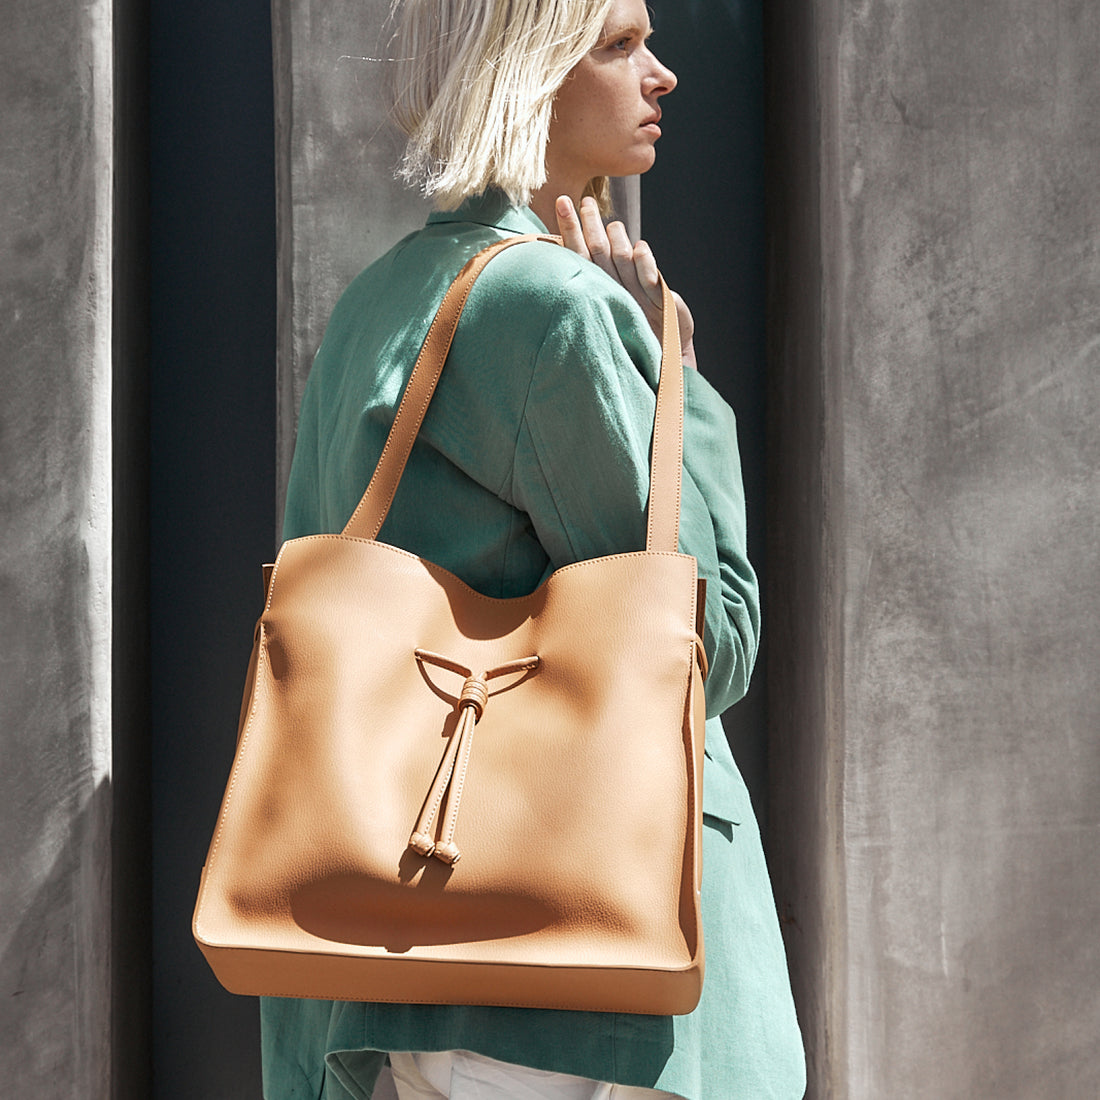 Elle: Hands Down, These Chic Leather Tote Bags Will Complete Any Outfit